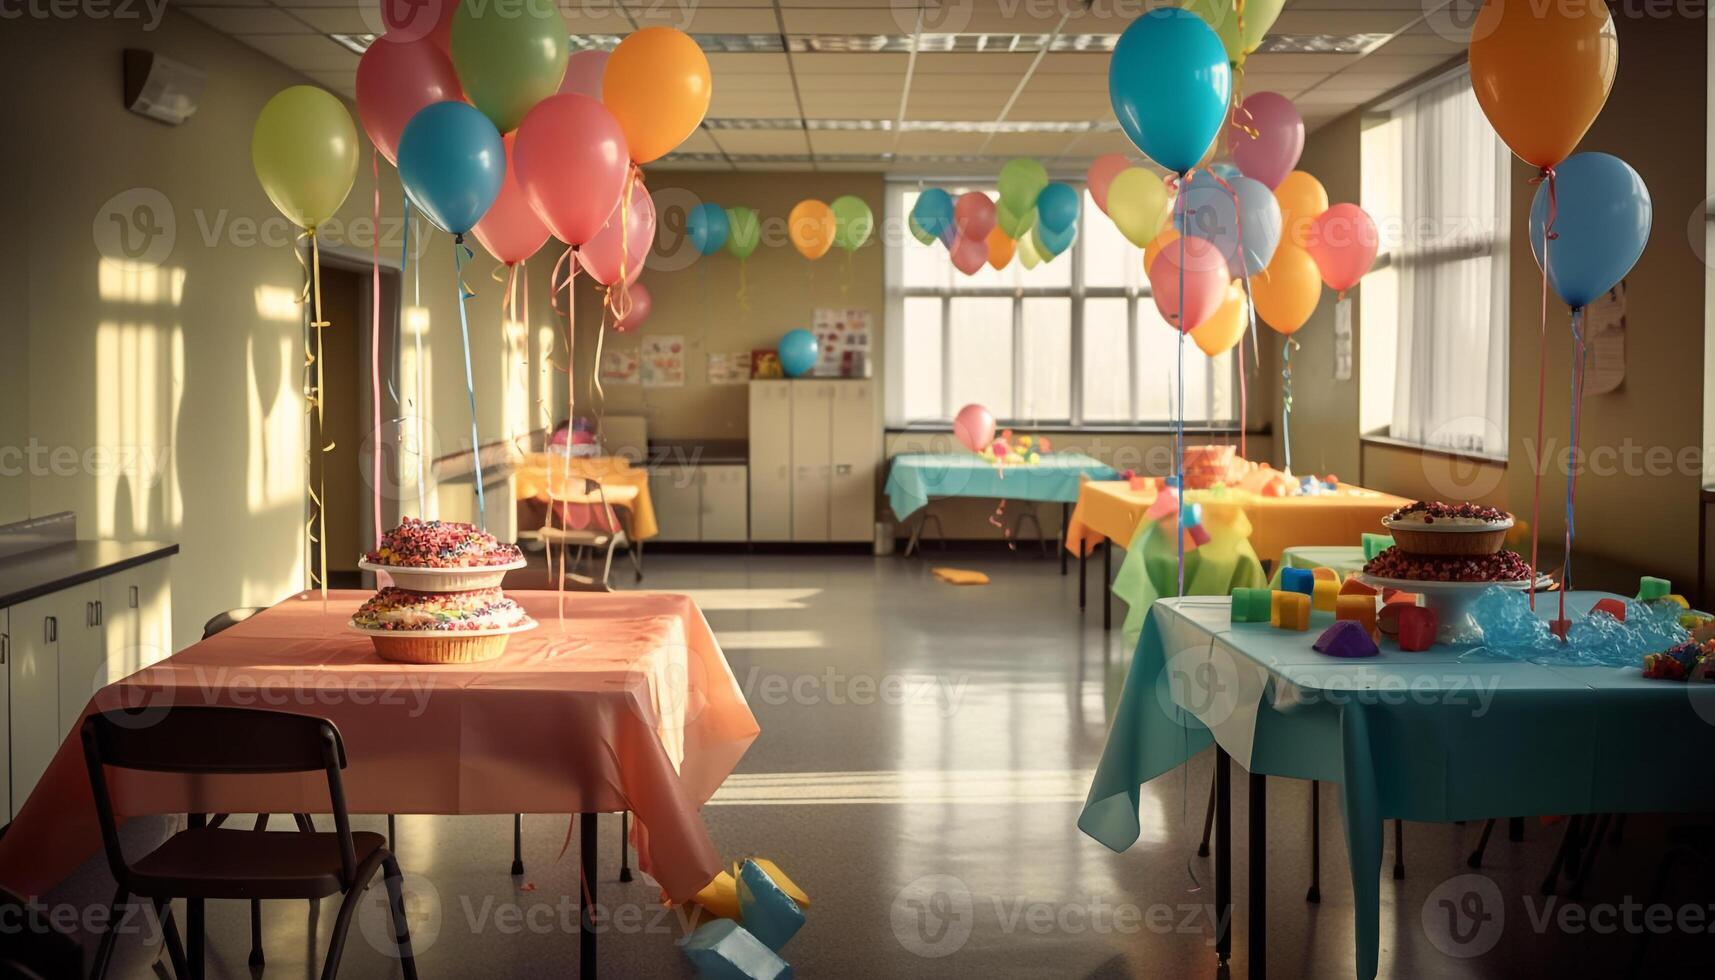 Colorful birthday party indoors with balloons, decorations, and desserts generated by AI photo